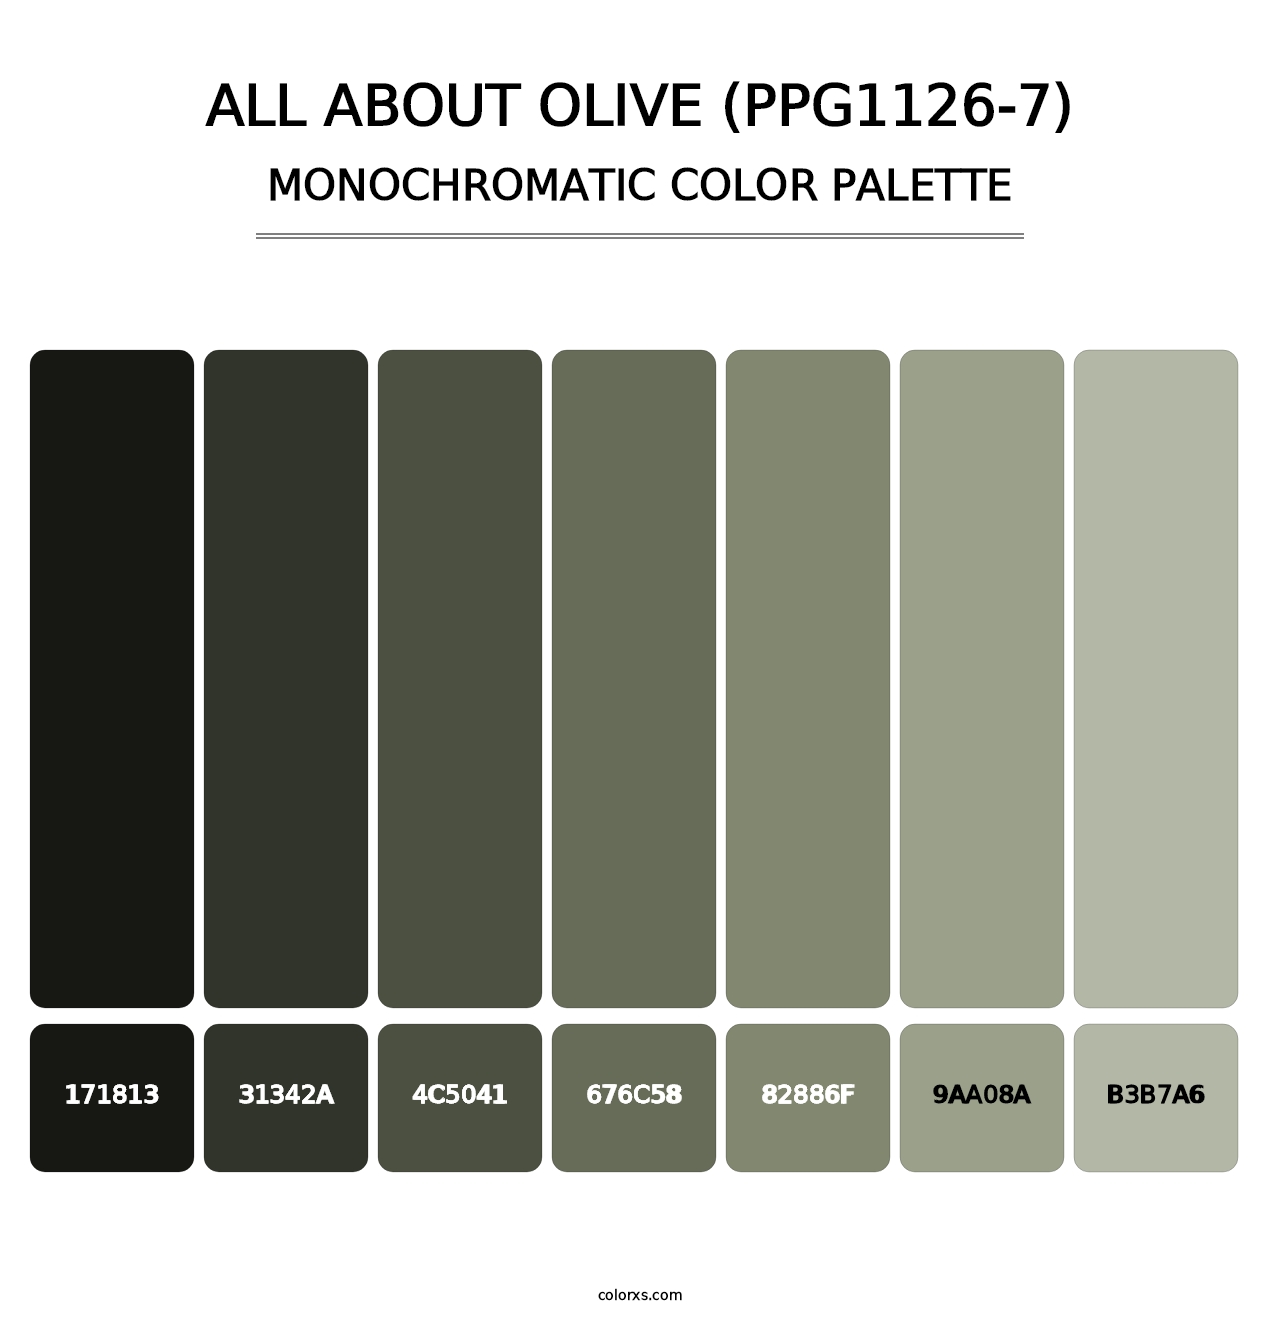 All About Olive (PPG1126-7) - Monochromatic Color Palette